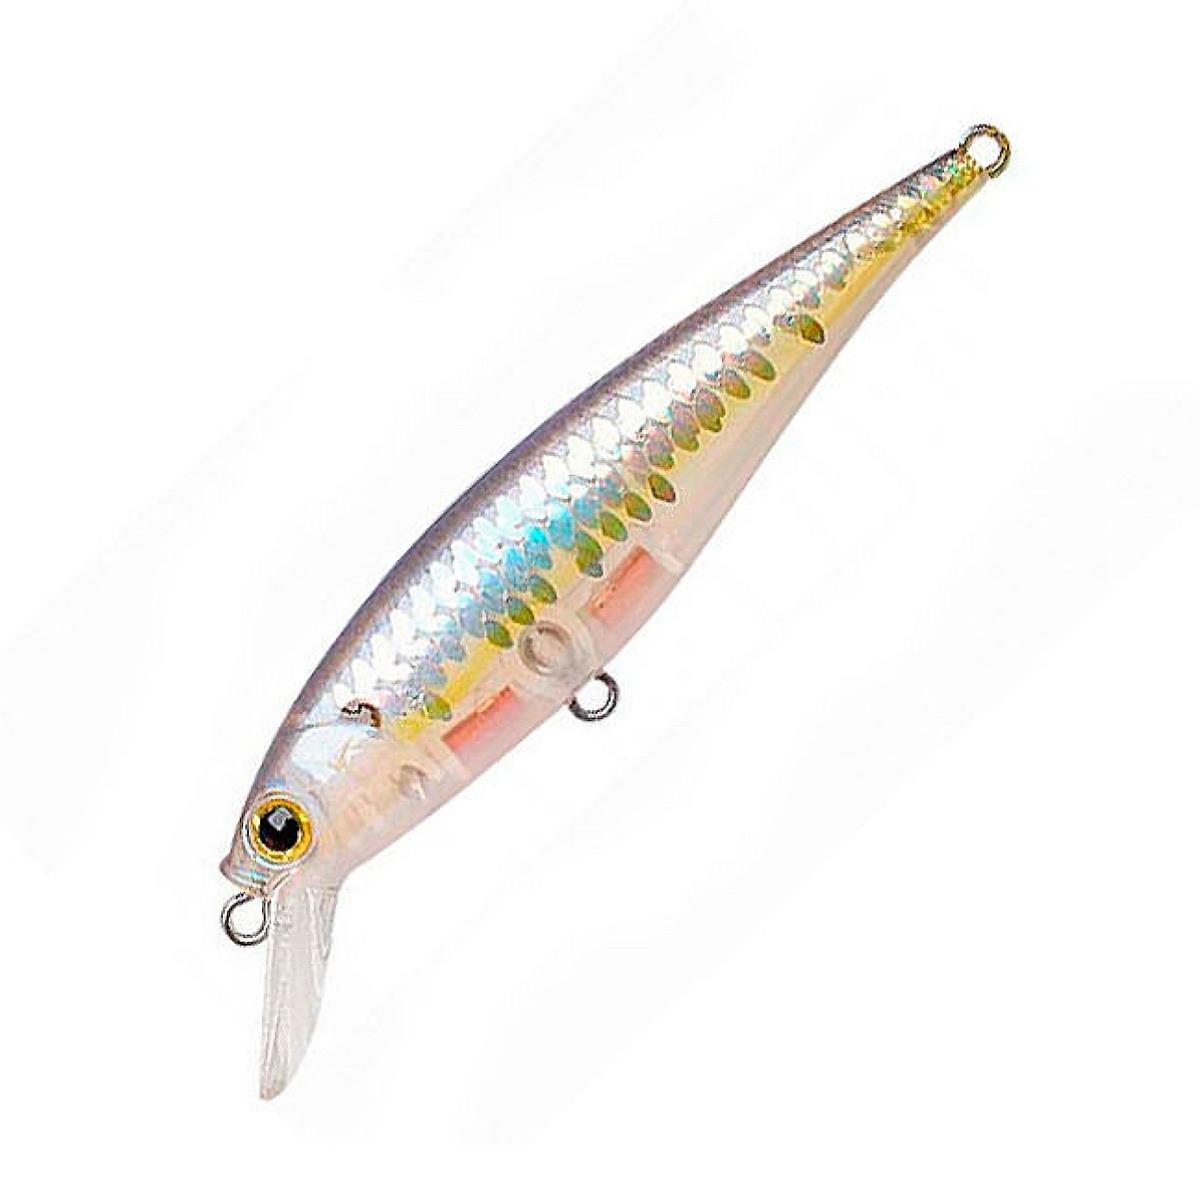 воблер pointer 78dd 250 chartreuse shad lucky craft Воблер Pointer 78-225 Ghost Chartreuse Shad Lucky Craft